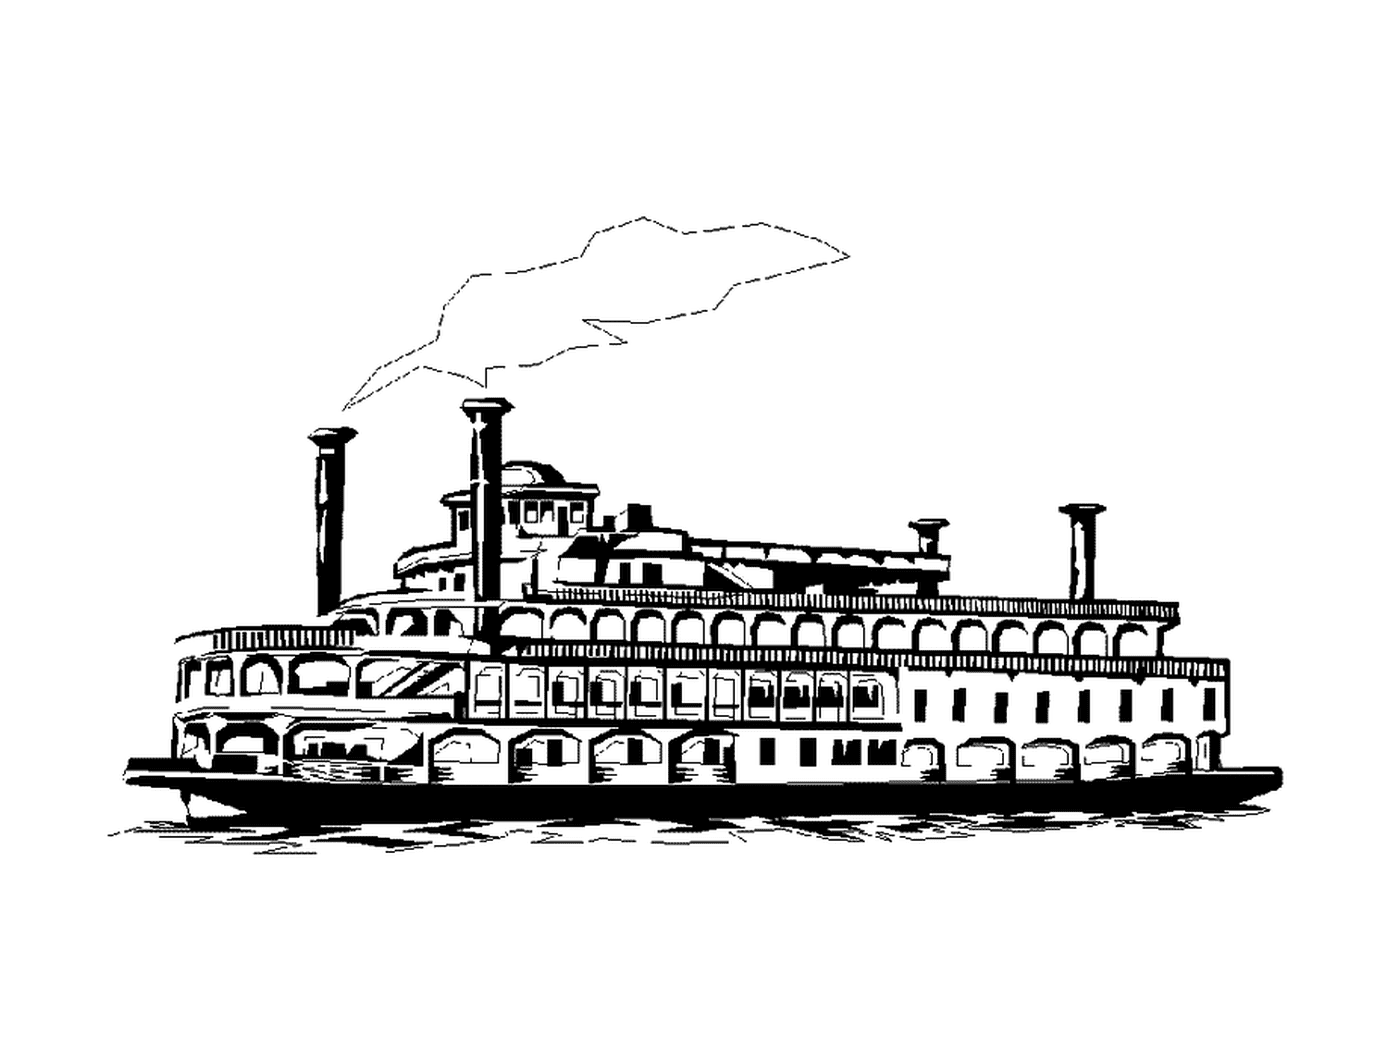  A wheeled ship from Mississippi 